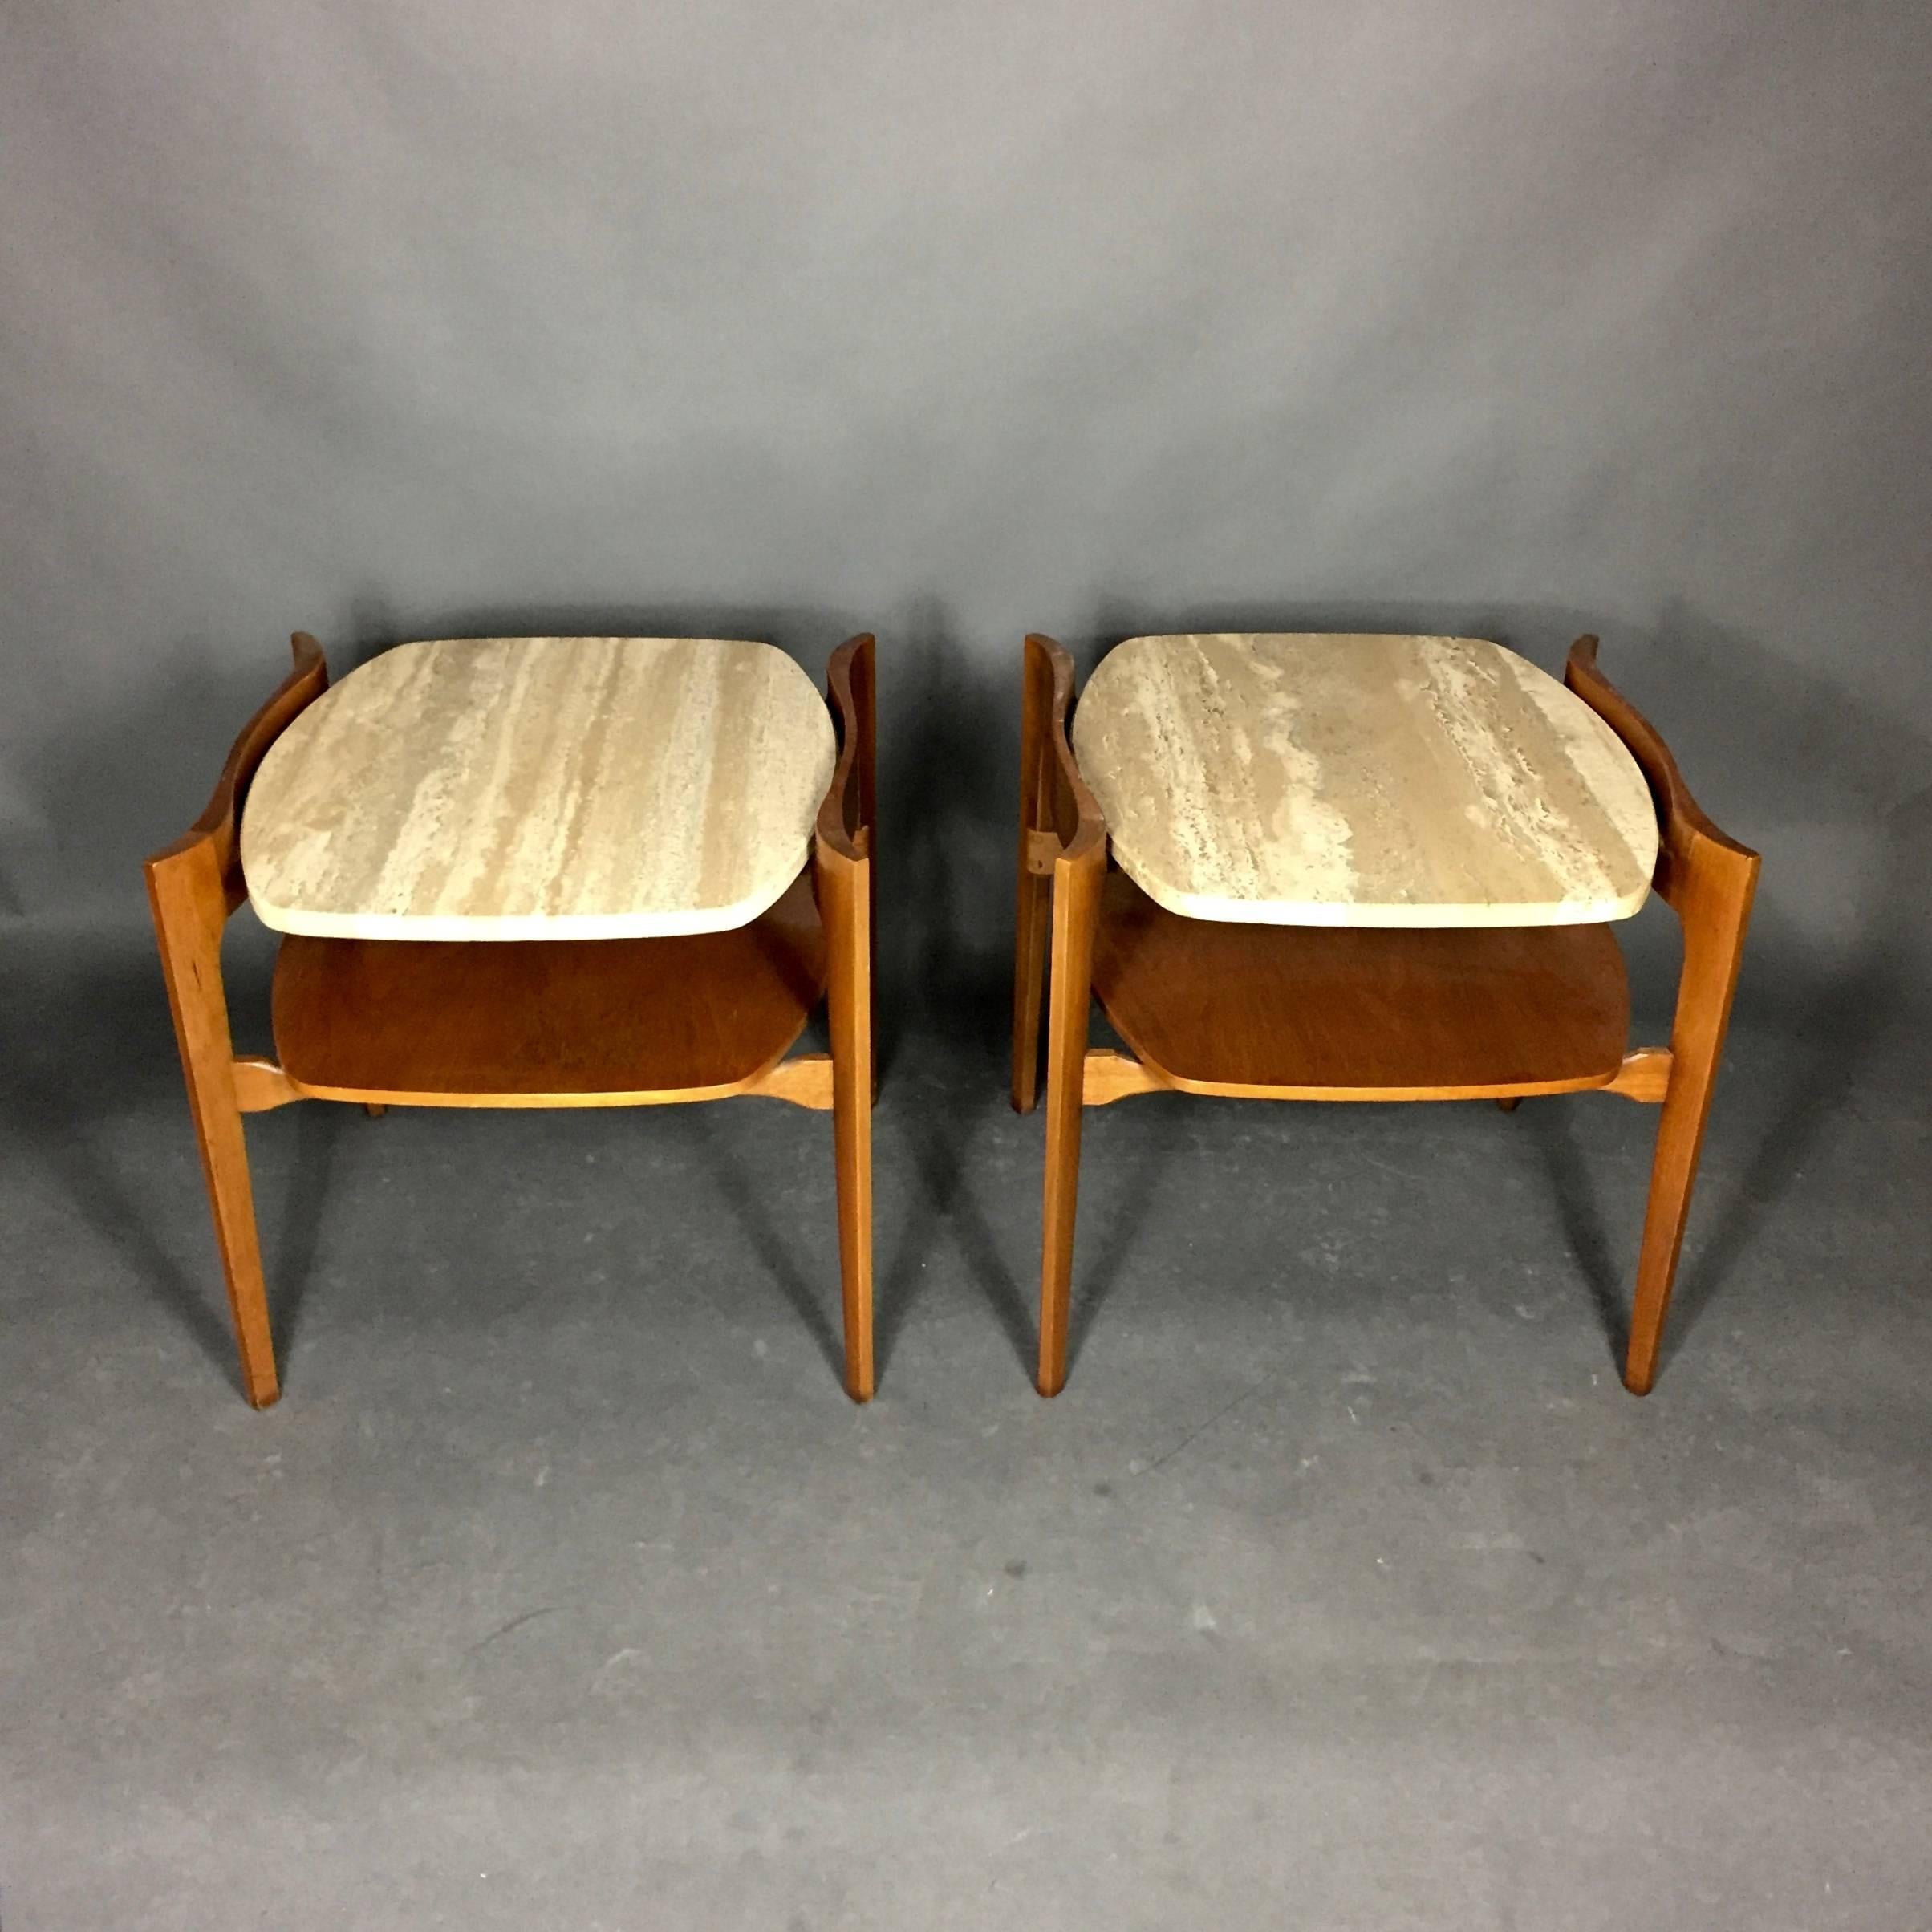 American Pair of Italian Travertine and Walnut End Tables, Walker Zanger, 1960s